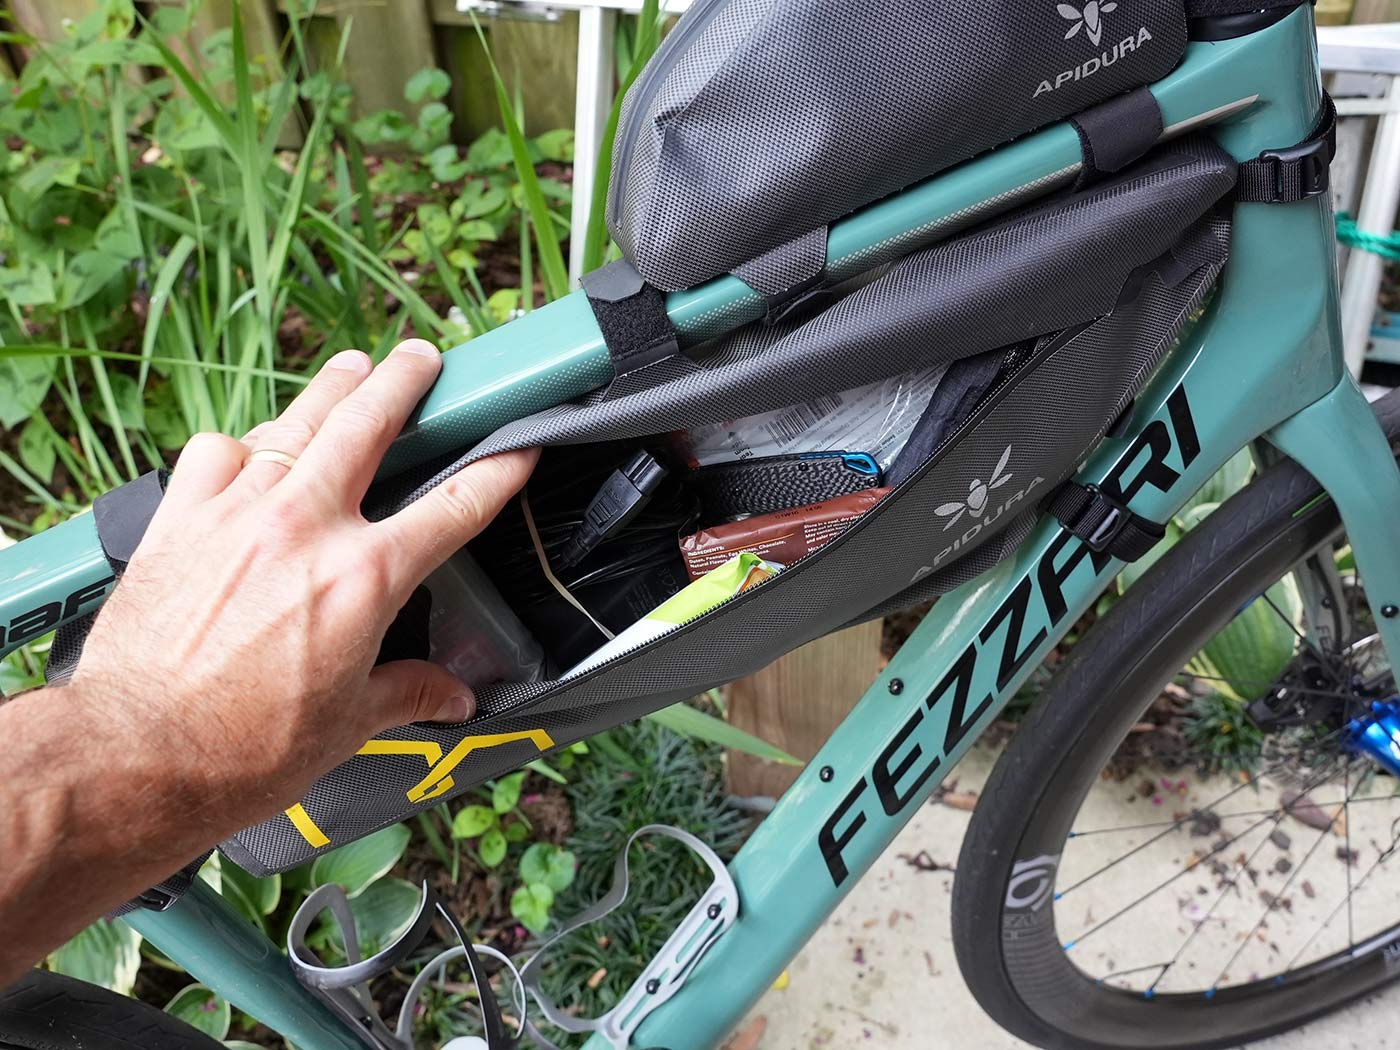 apidura expedition frame pack shown open on right side